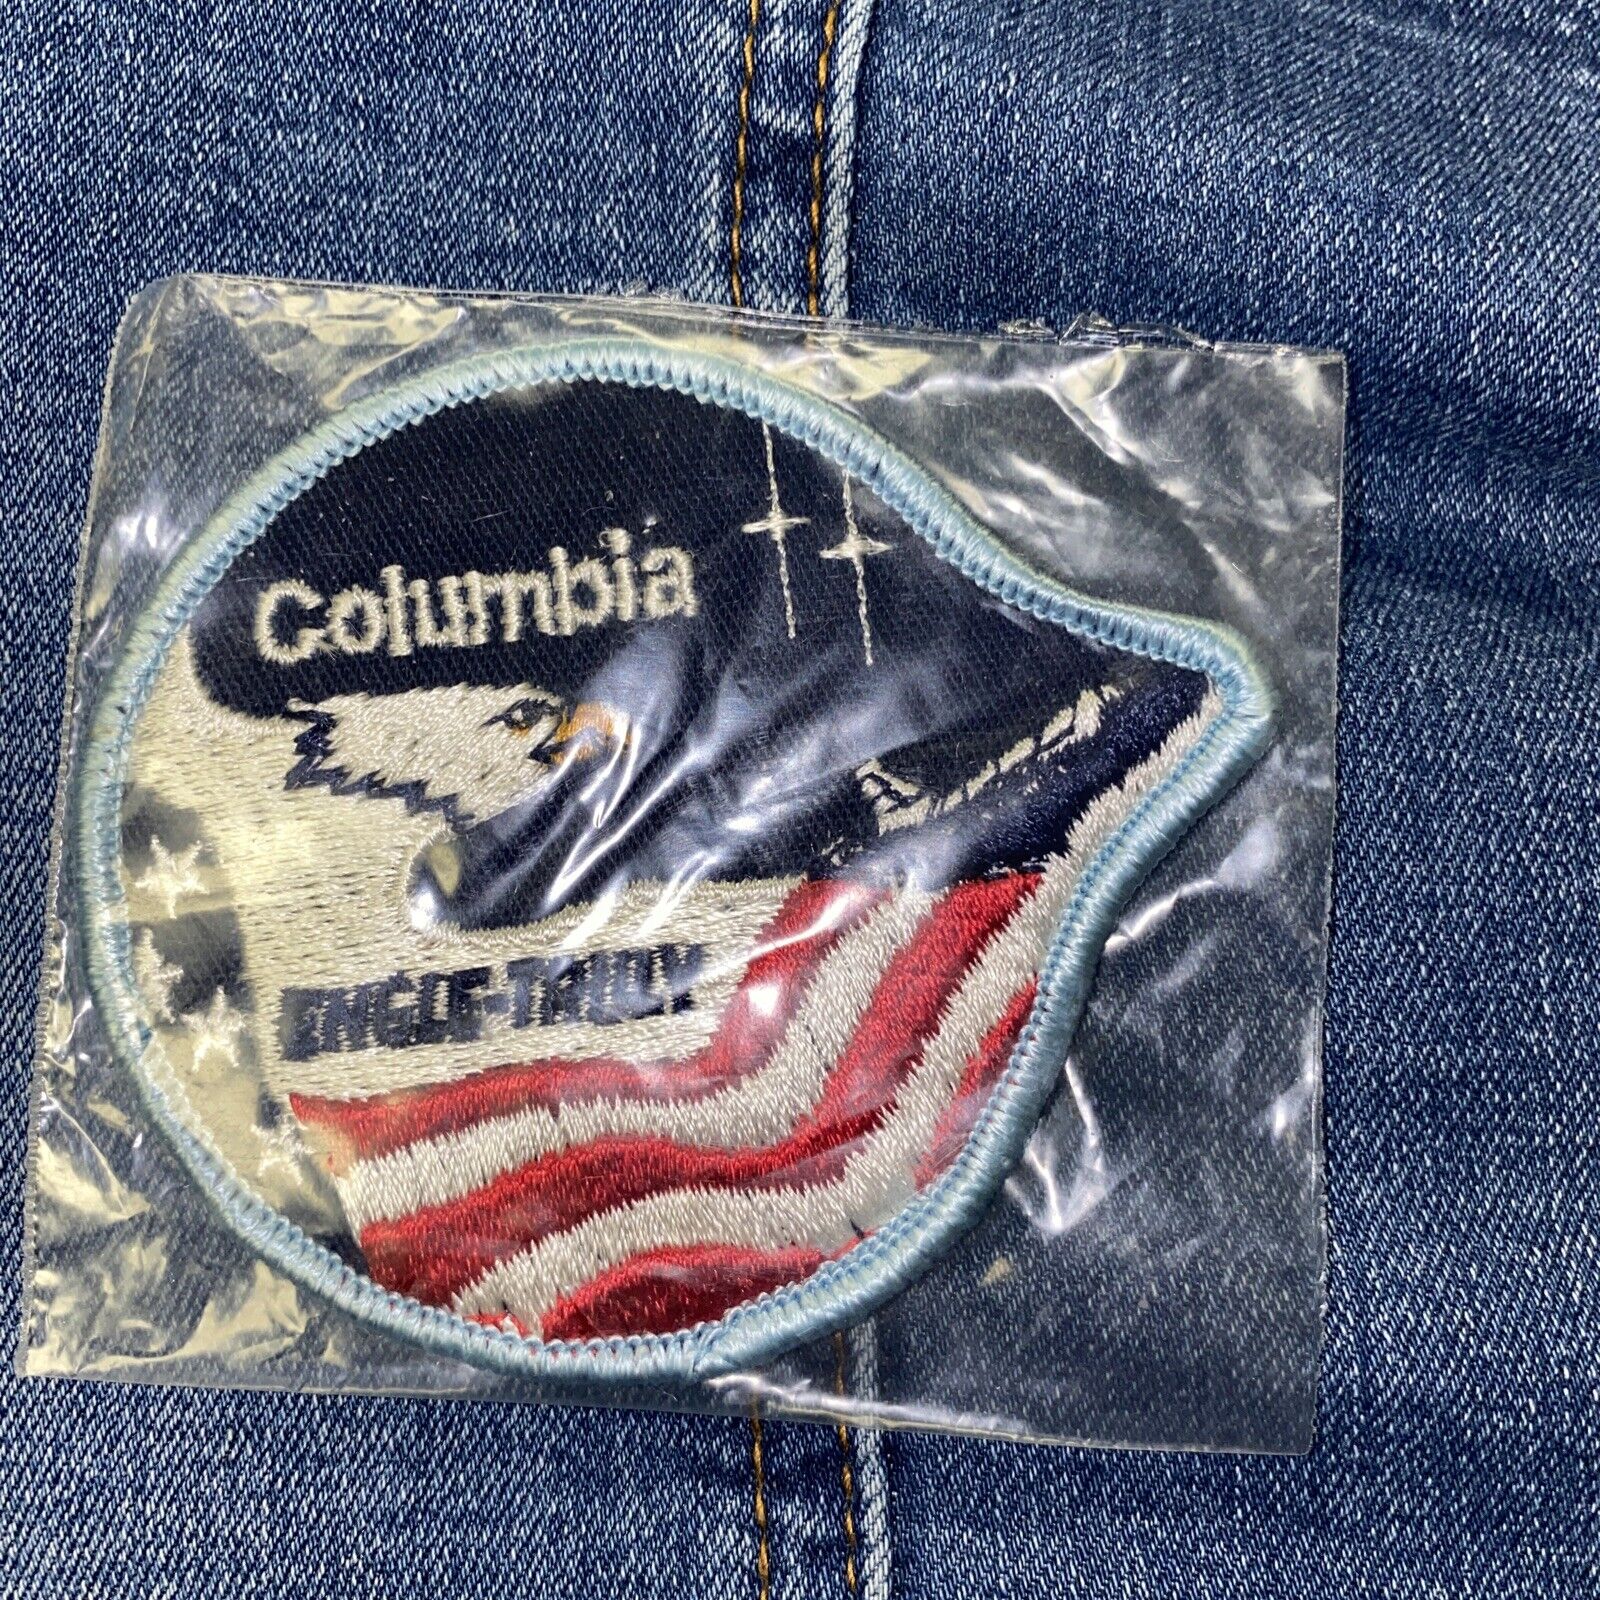 Original, Vintage 1981 NASA Columbia (Engle- Truly) Patch STS-2 